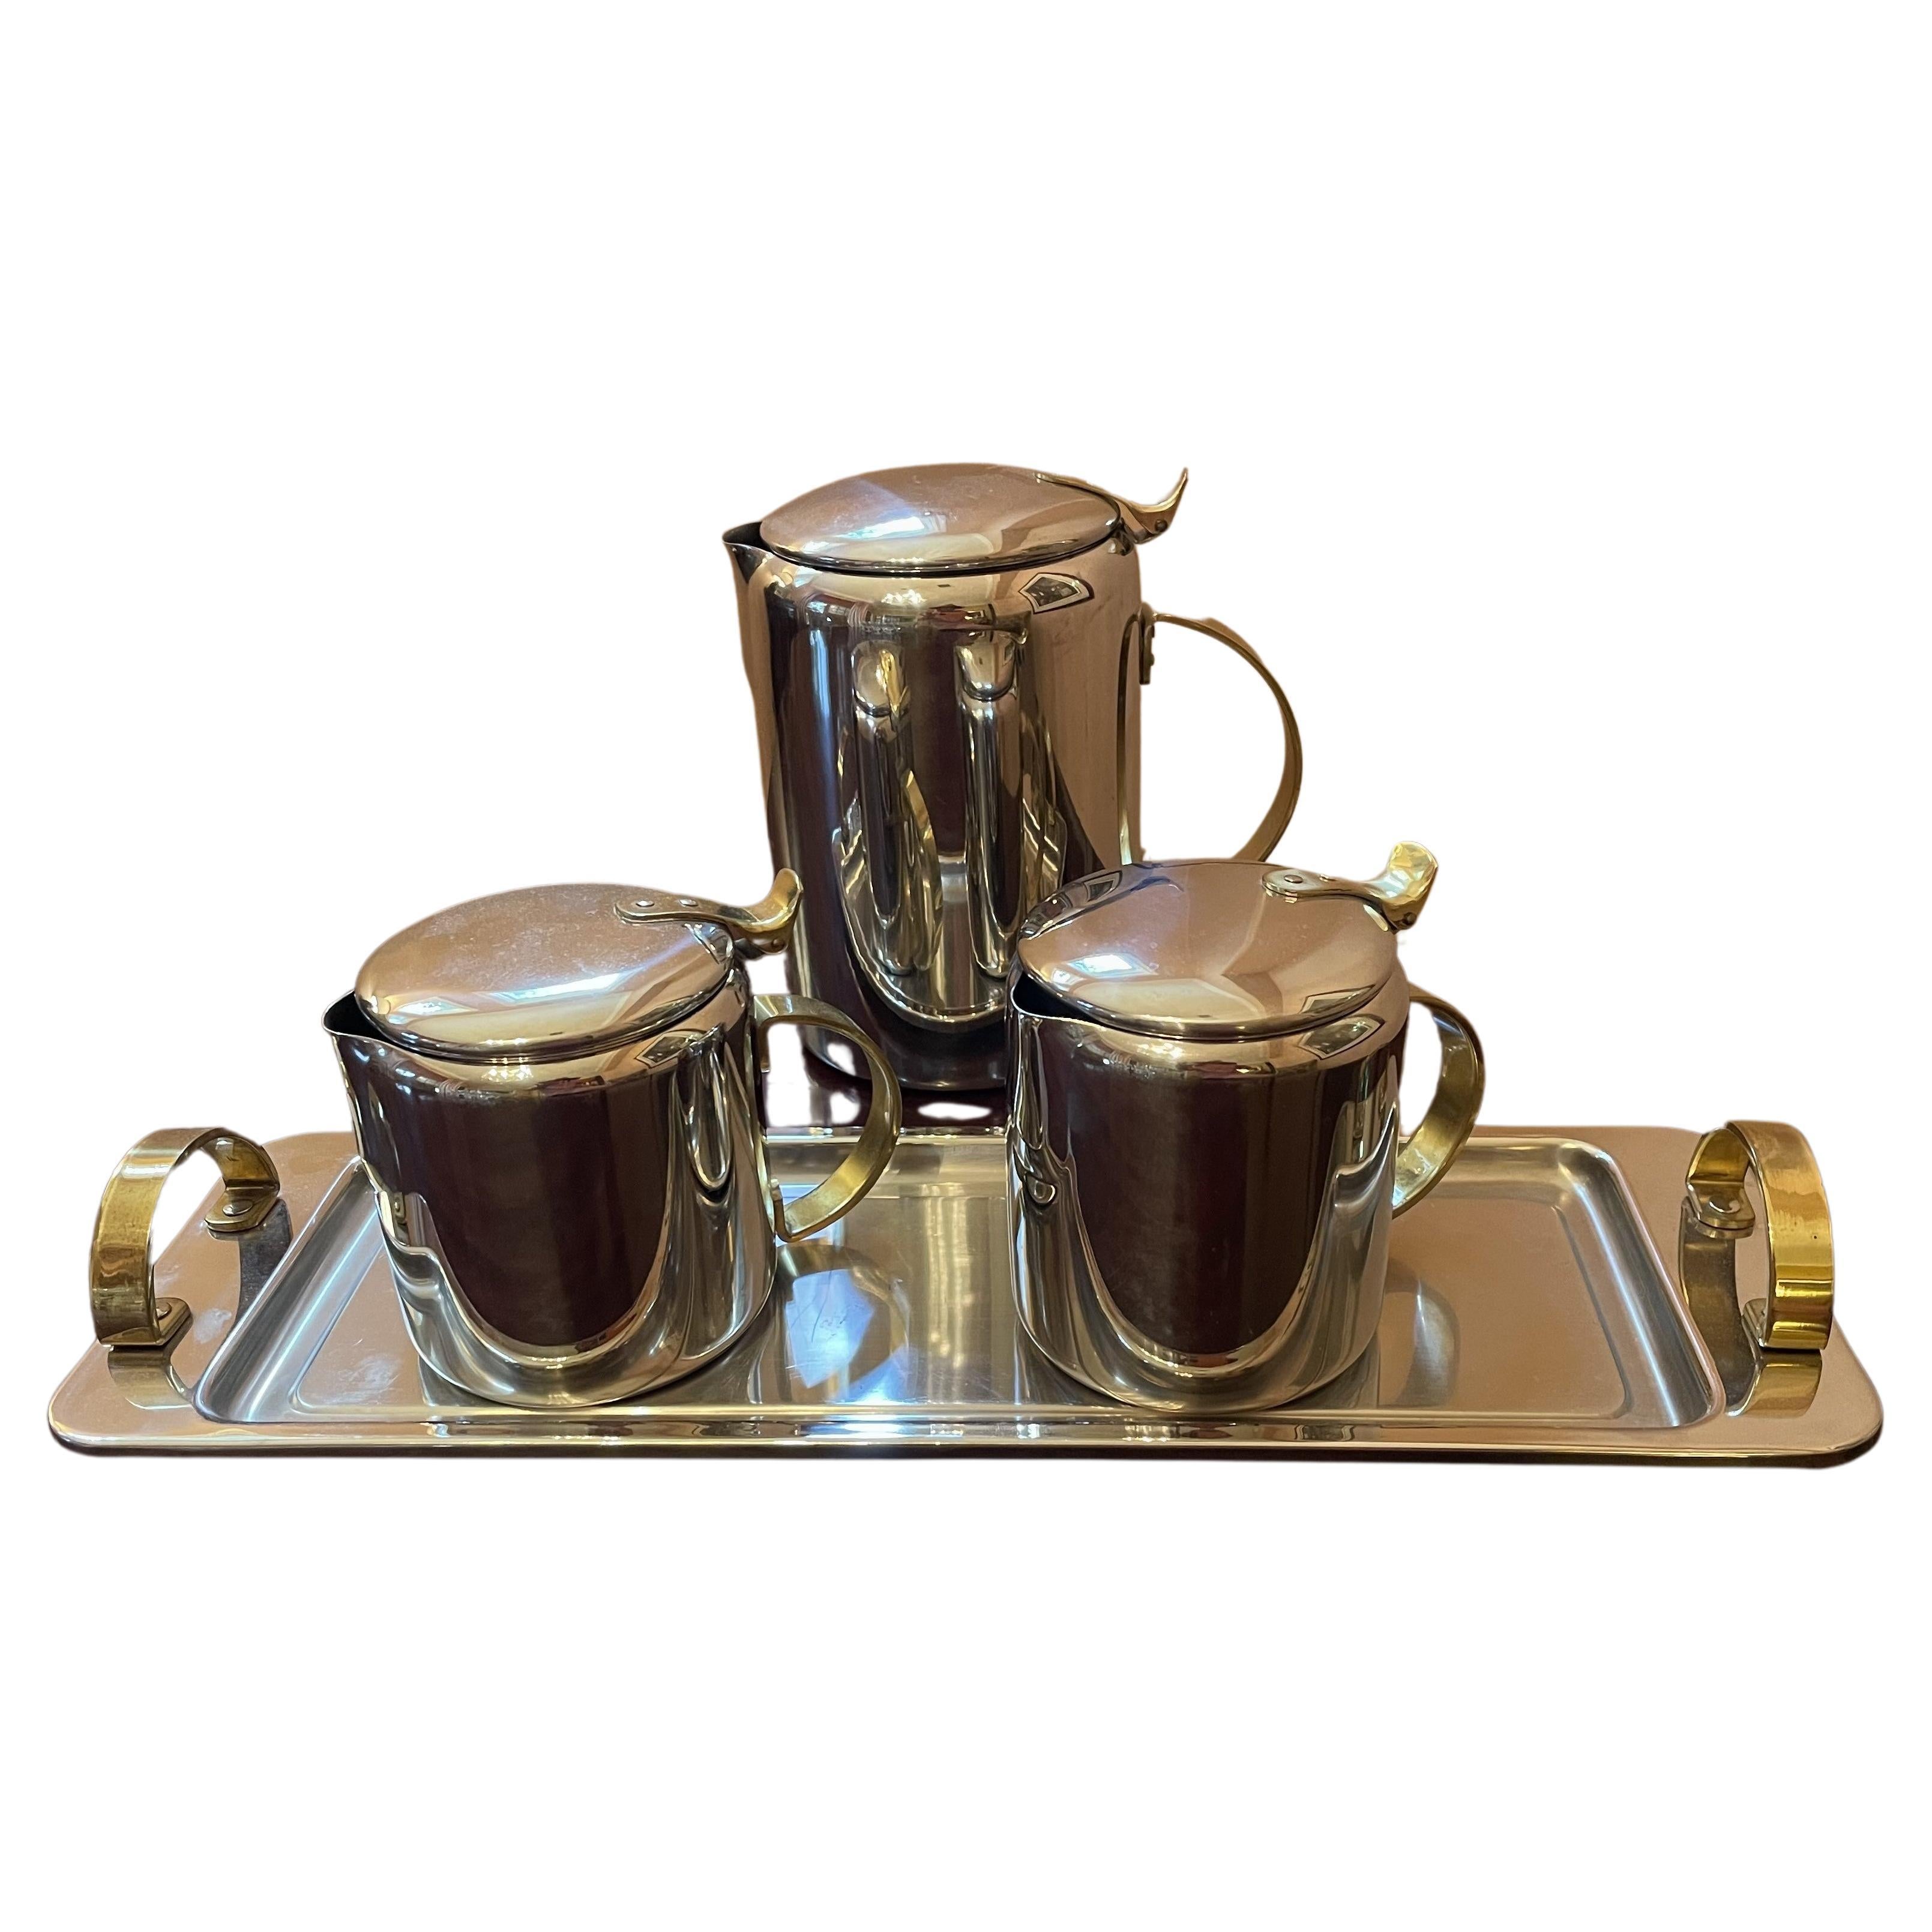 https://a.1stdibscdn.com/mid-century-modern-polished-chrome-and-brass-tea-or-coffee-service-with-tray-for-sale/f_63092/f_380099221705614952128/f_38009922_1705614953472_bg_processed.jpg